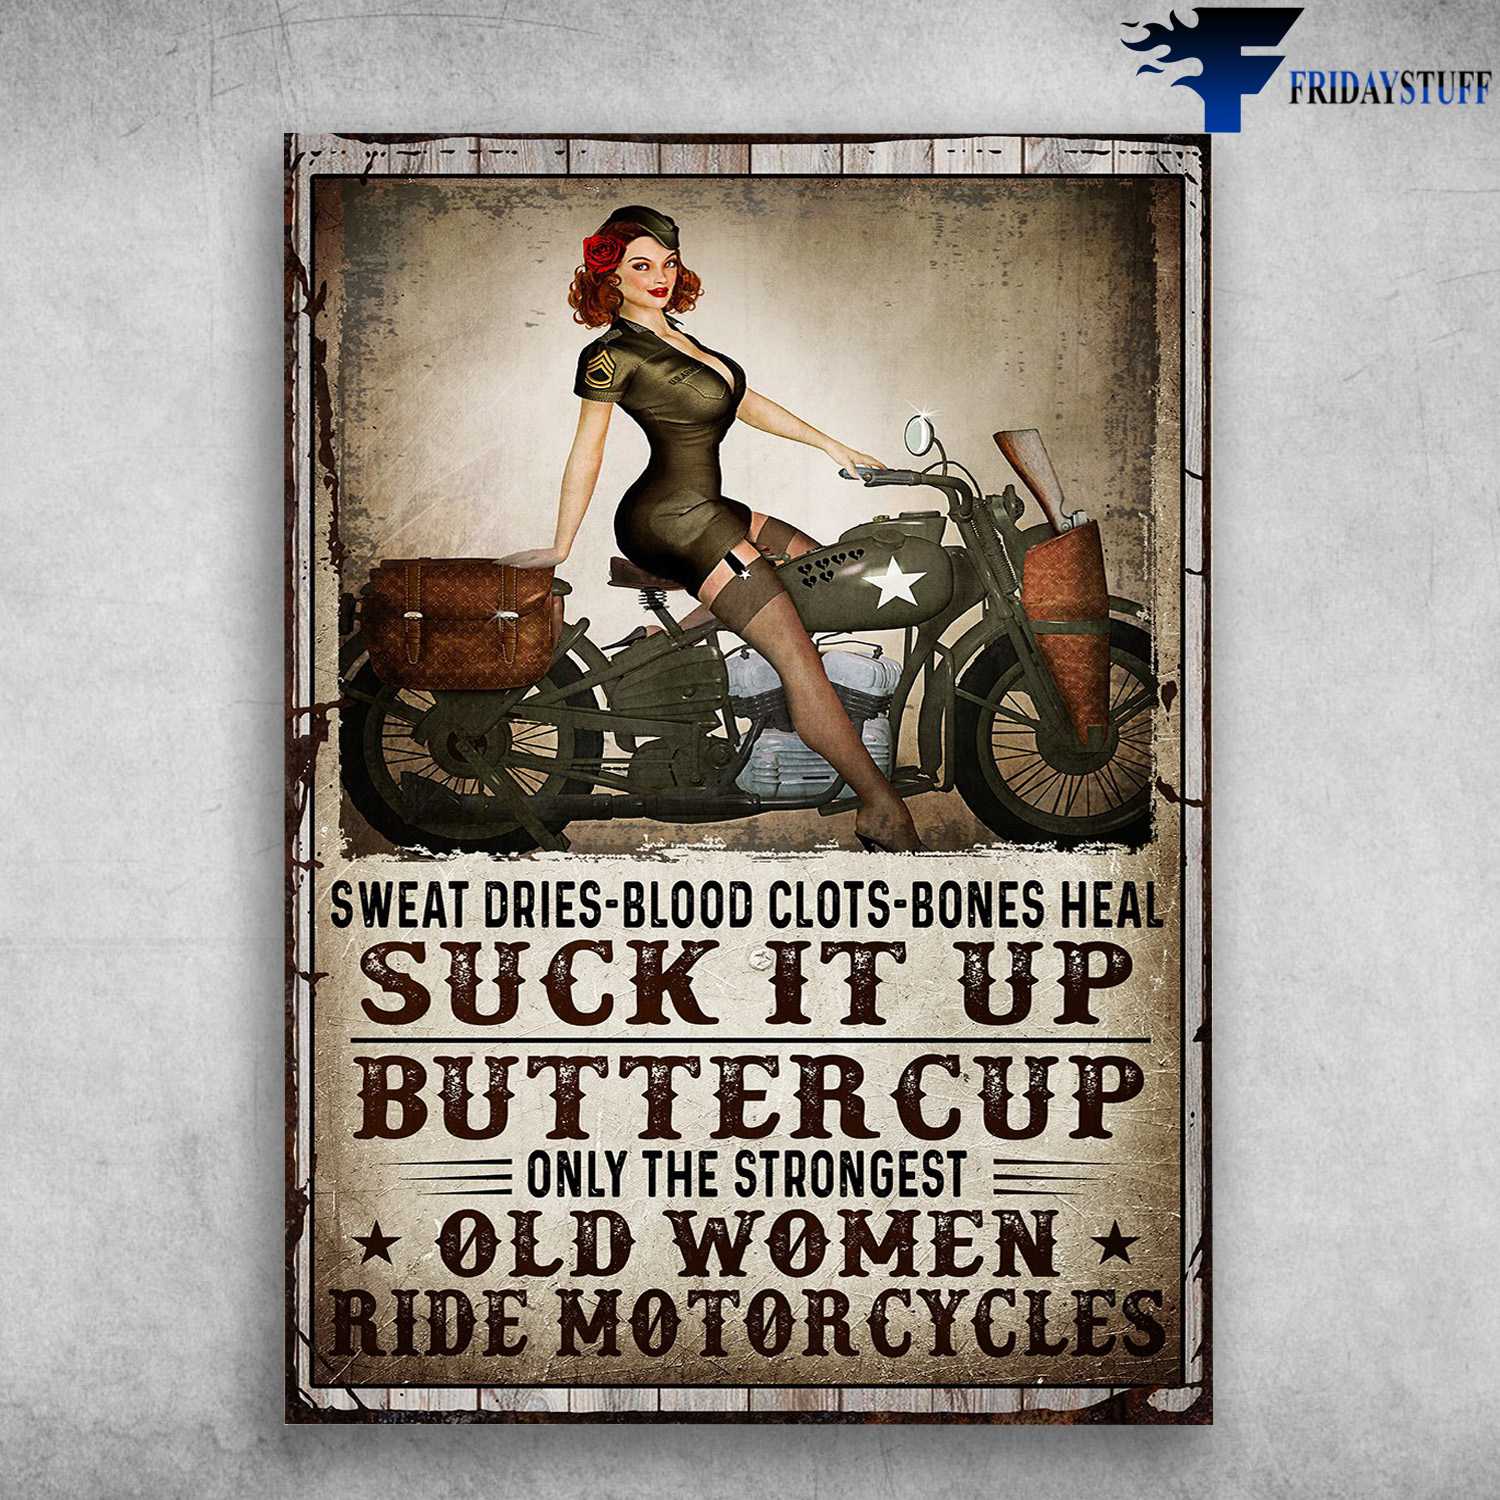 Lady Motorcycling, Biker Lover - Swear Dries-Blood Clots-Bones Heal, Suck It Up Buttercup, Only The Strongest Old Women, Ride Motorcycles